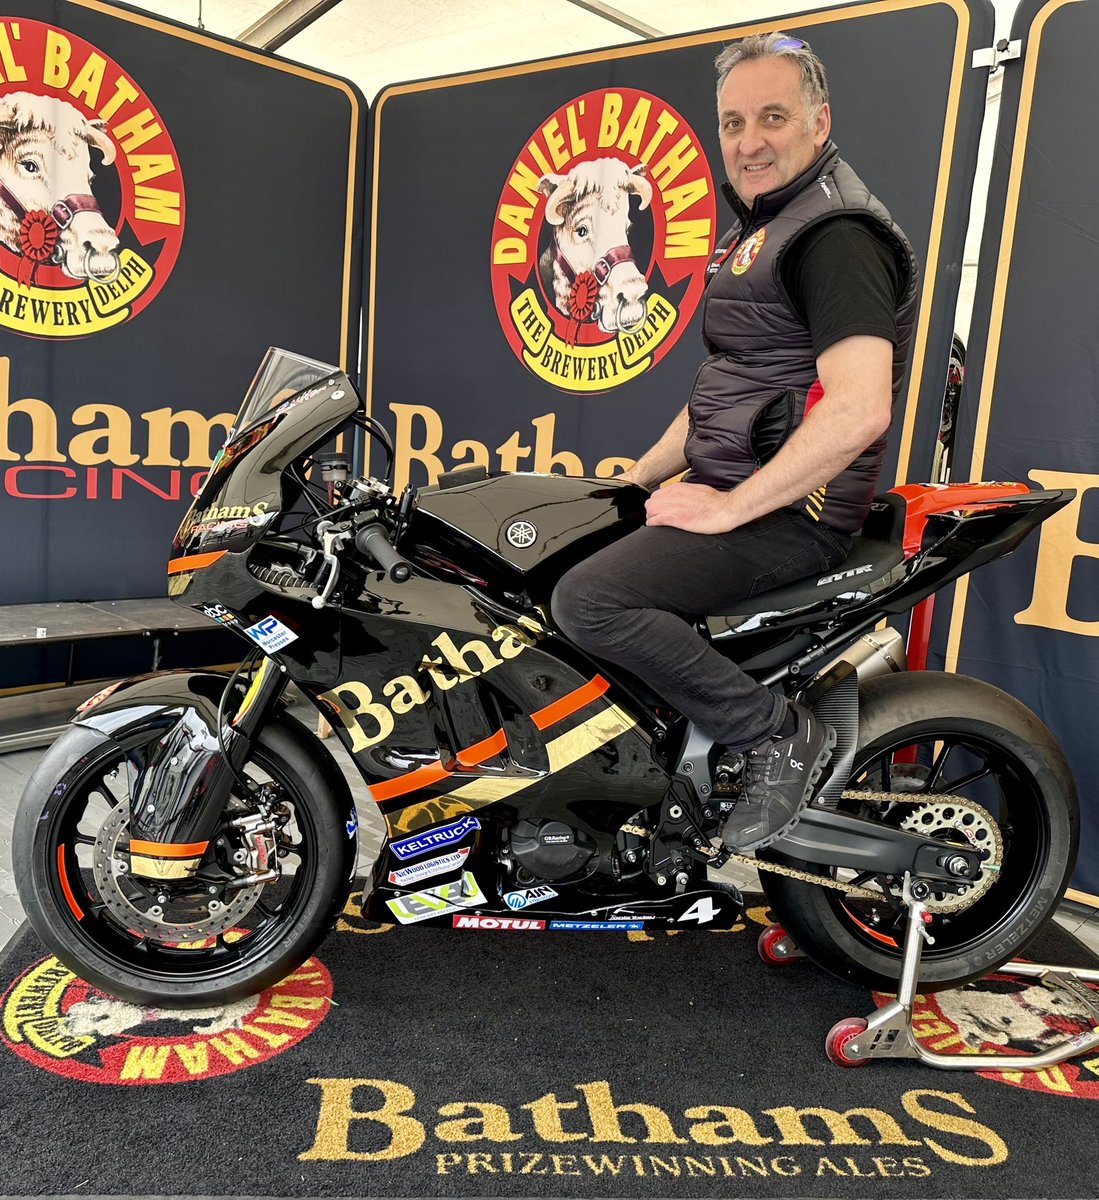 That’s us ready for the Northwest 200. This will be Michaels 31st Northwest 200, and he’s going to race an @FHO_Racing by Bathams Superbike, and also a Yamaha R7 in the Supertwin class. Let’s go ! @thebathams